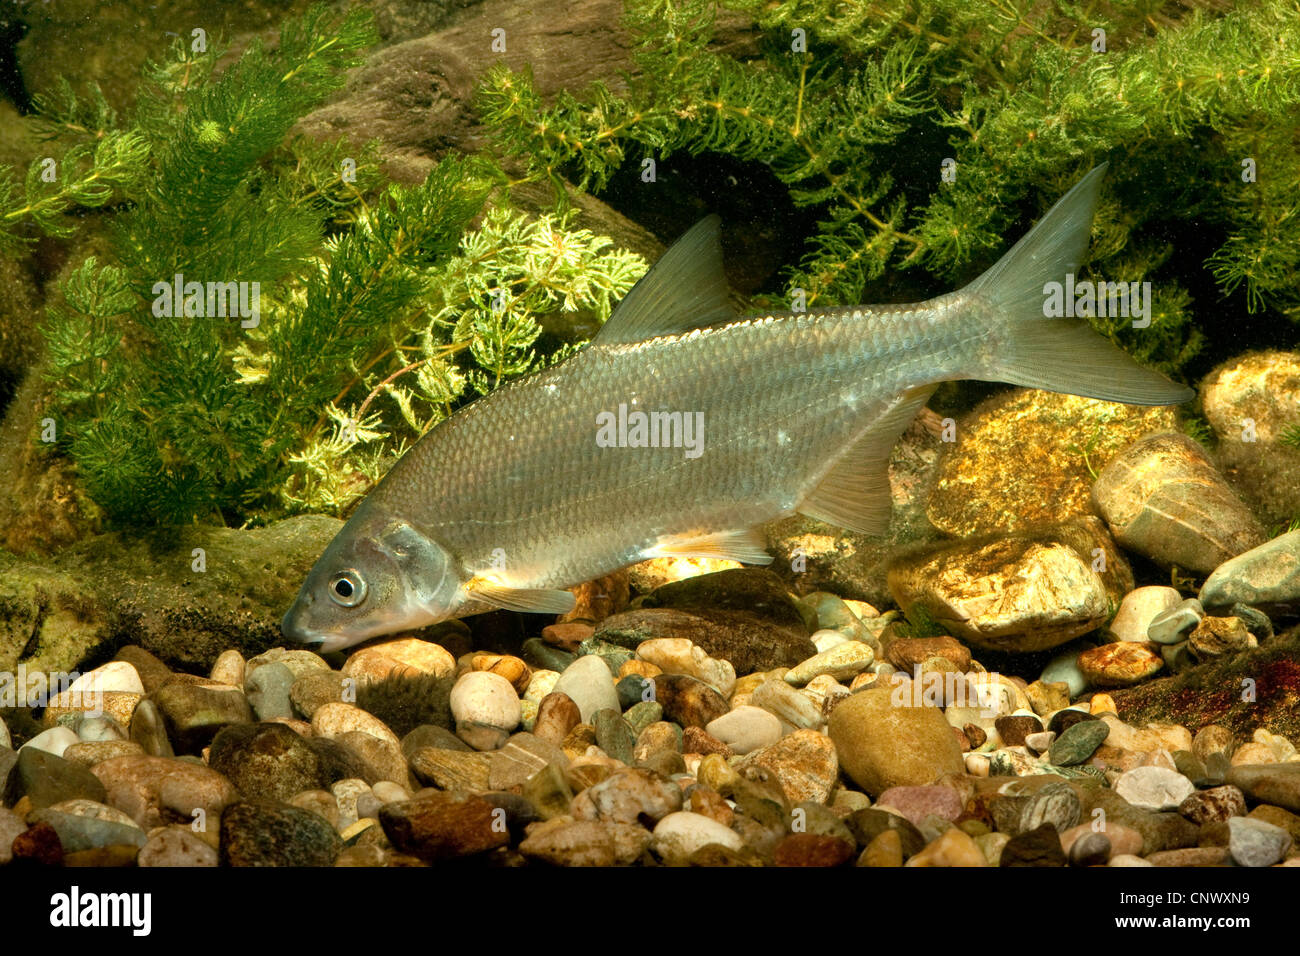 East European bream, zaehrte, Baltic vimba (Vimba vimba), swimming over river pebbles in front of Common Water Moss, Germany, Bavaria, Danube Stock Photo